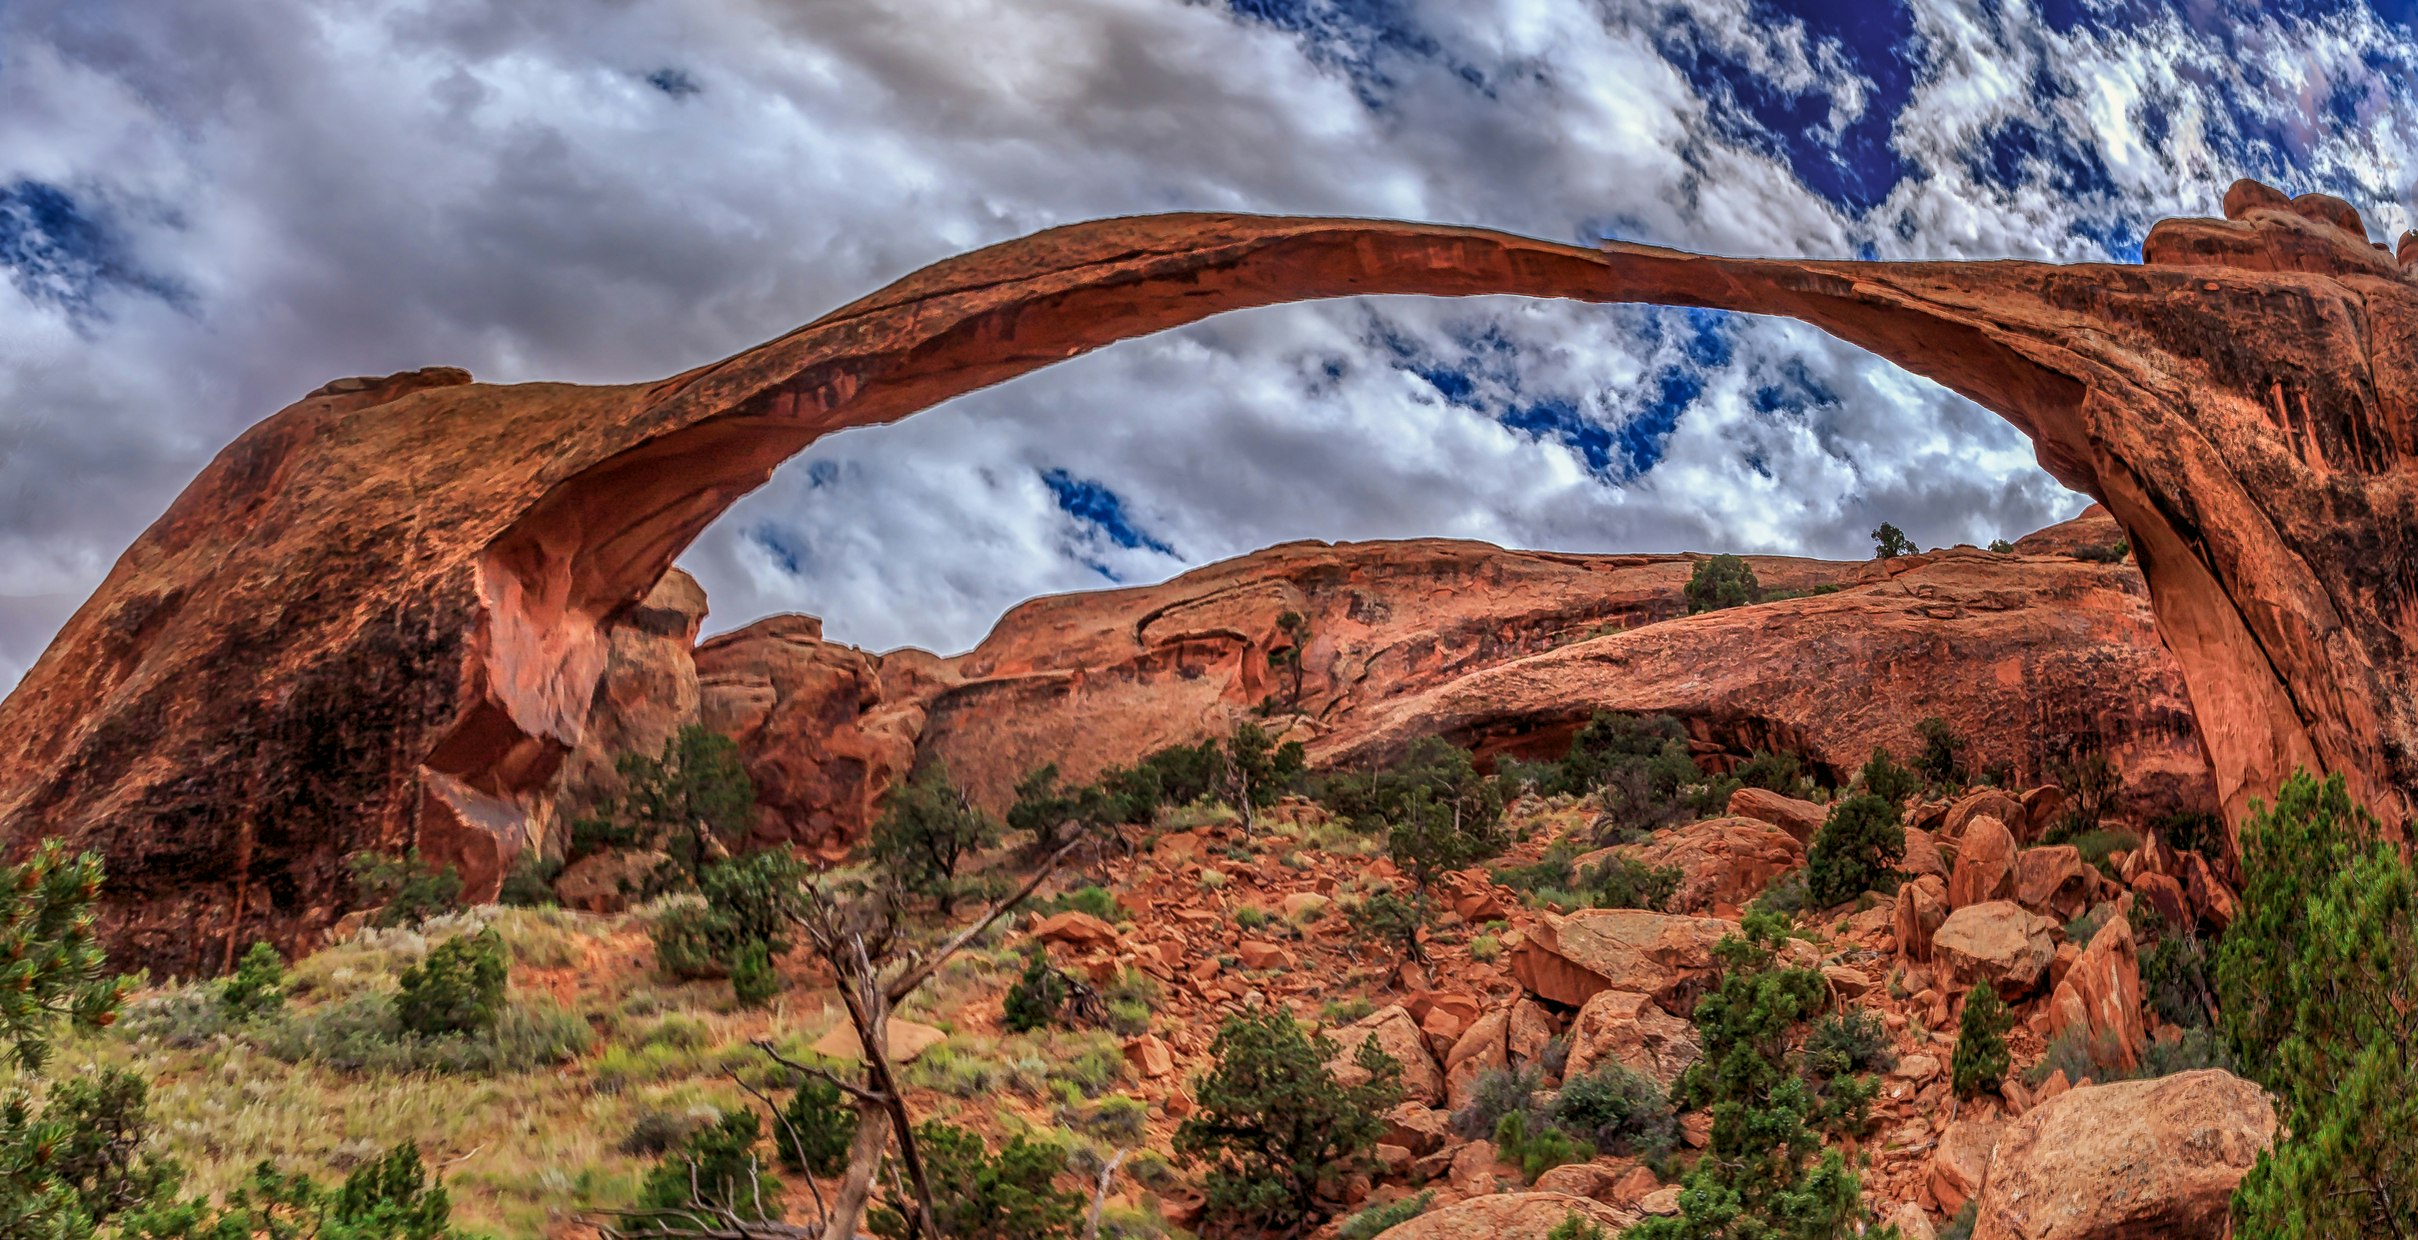 An HDR shot with vivid red and orange towns showing Landscape Arch in Utah's Arches National Park